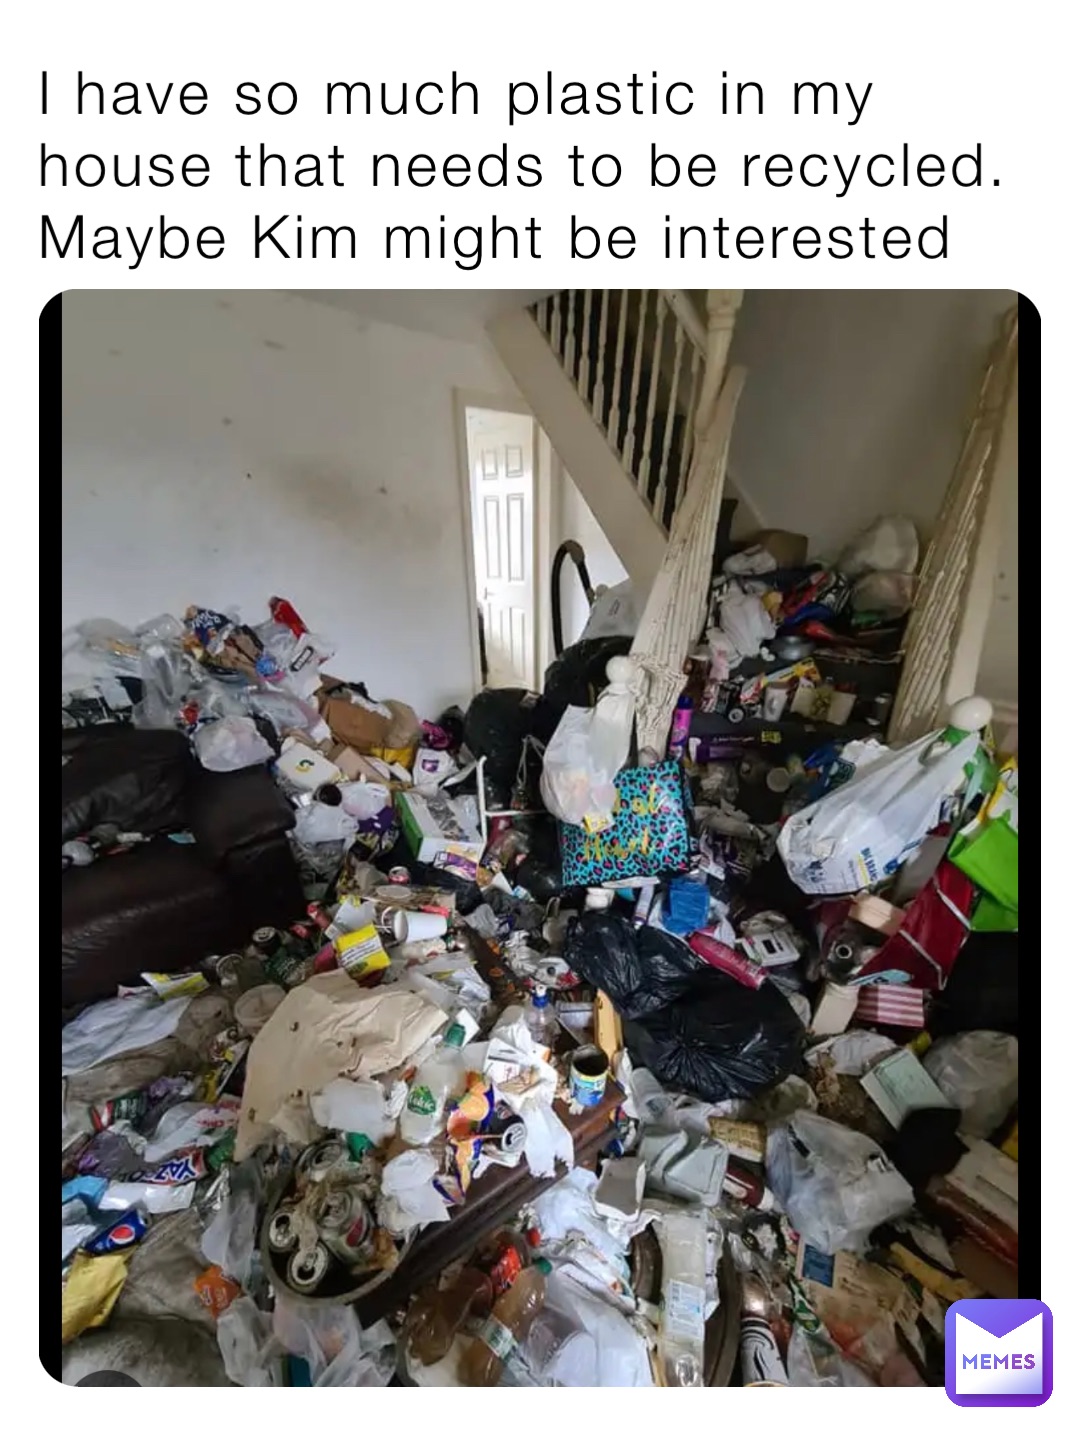 I have so much plastic in my house that needs to be recycled. Maybe Kim might be interested